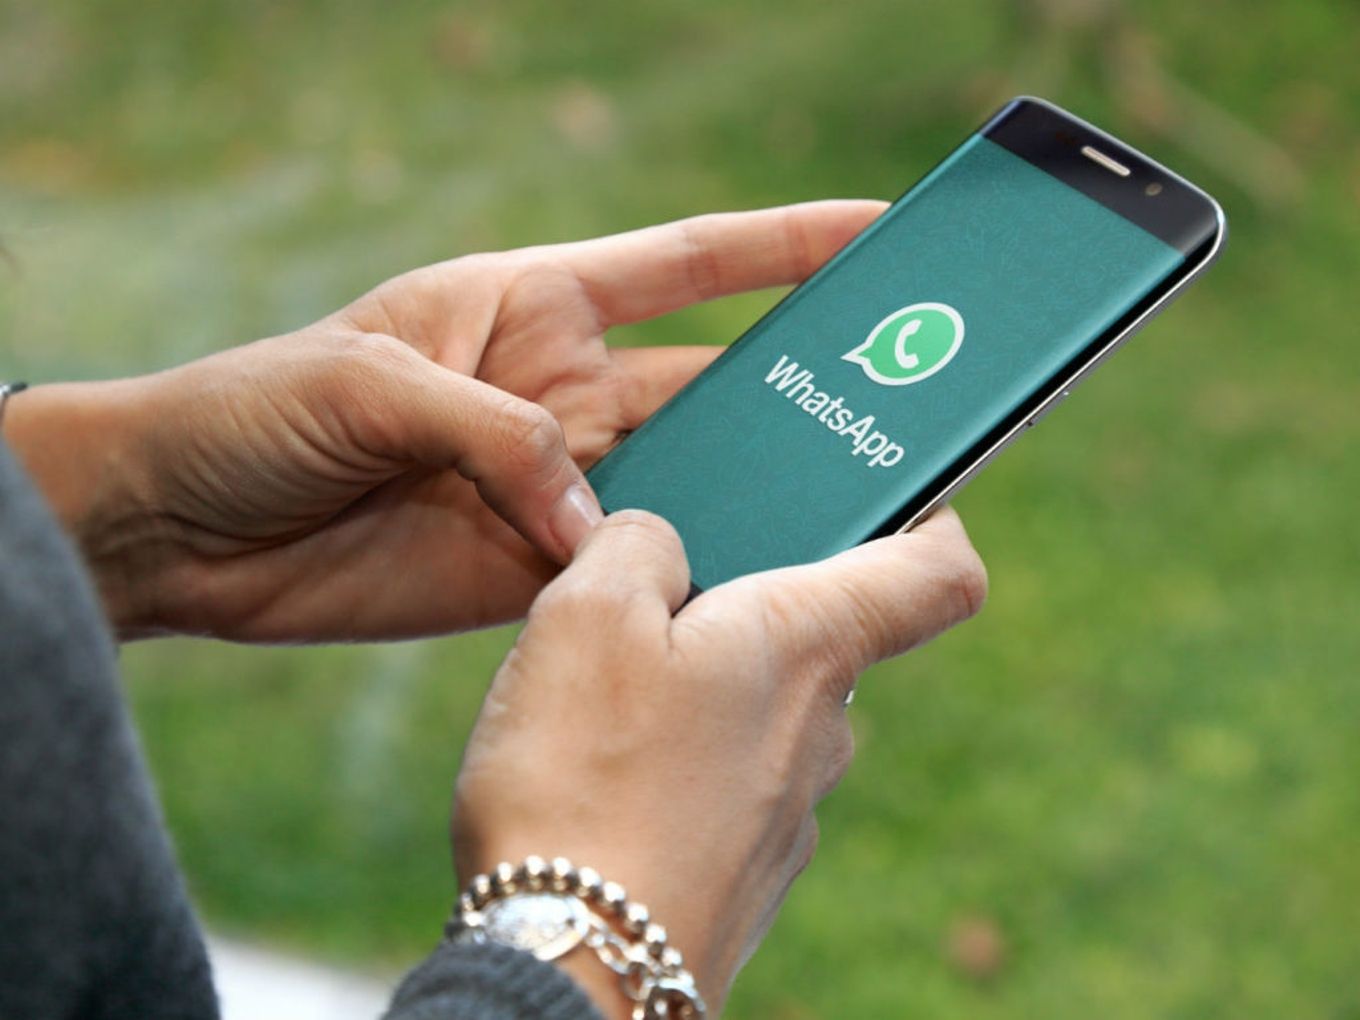 WhatsApp Payments Launch Might Not Happen This Year